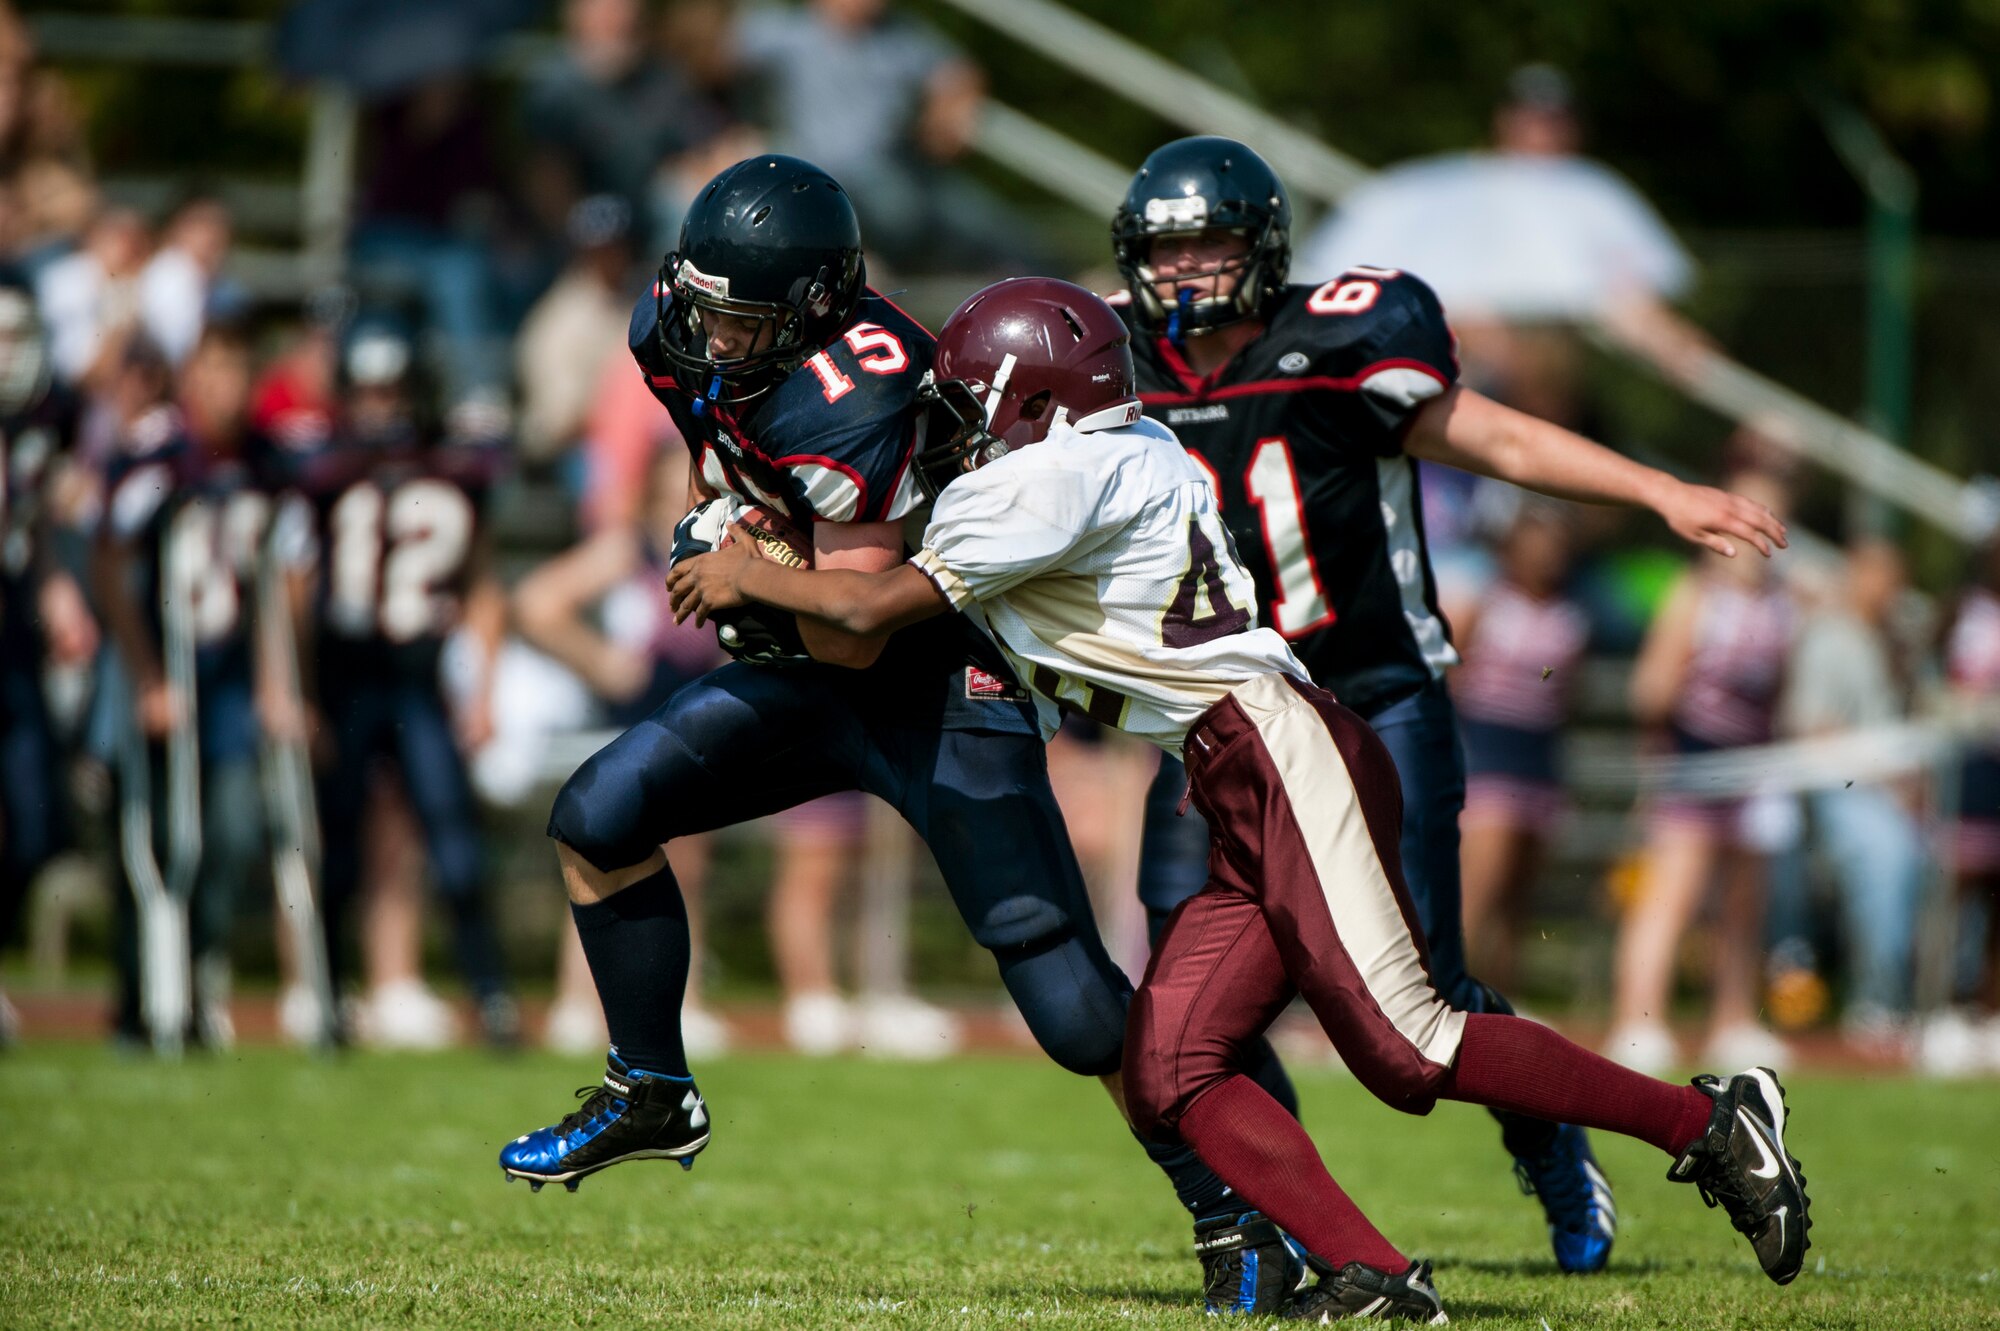 John Blake, a Bitburg Barons football team tight end, runs with the ball during a game against the Baumholder Buccaneers Sept. 6, 2014, at Bitburg Annex, Germany. The Barons won the game 32-8. (U.S. Air Force photo by Senior Airman Rusty Frank/Released)